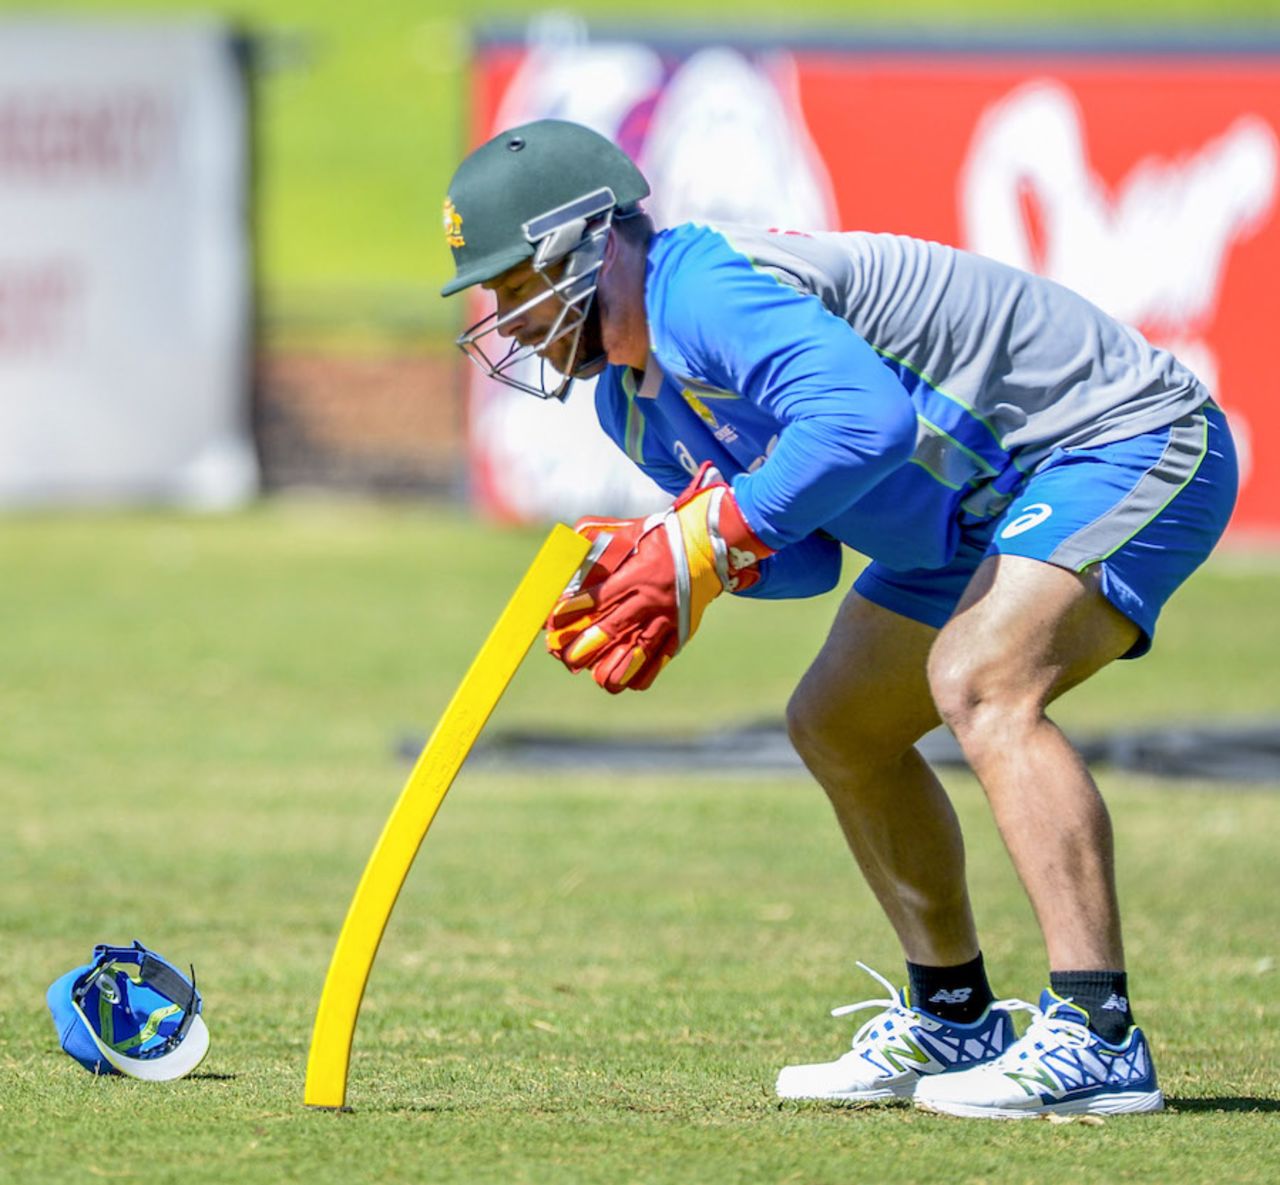 Matthew Wade takes part in a wicketkeeping drill, Johannesburg, September 25, 2016